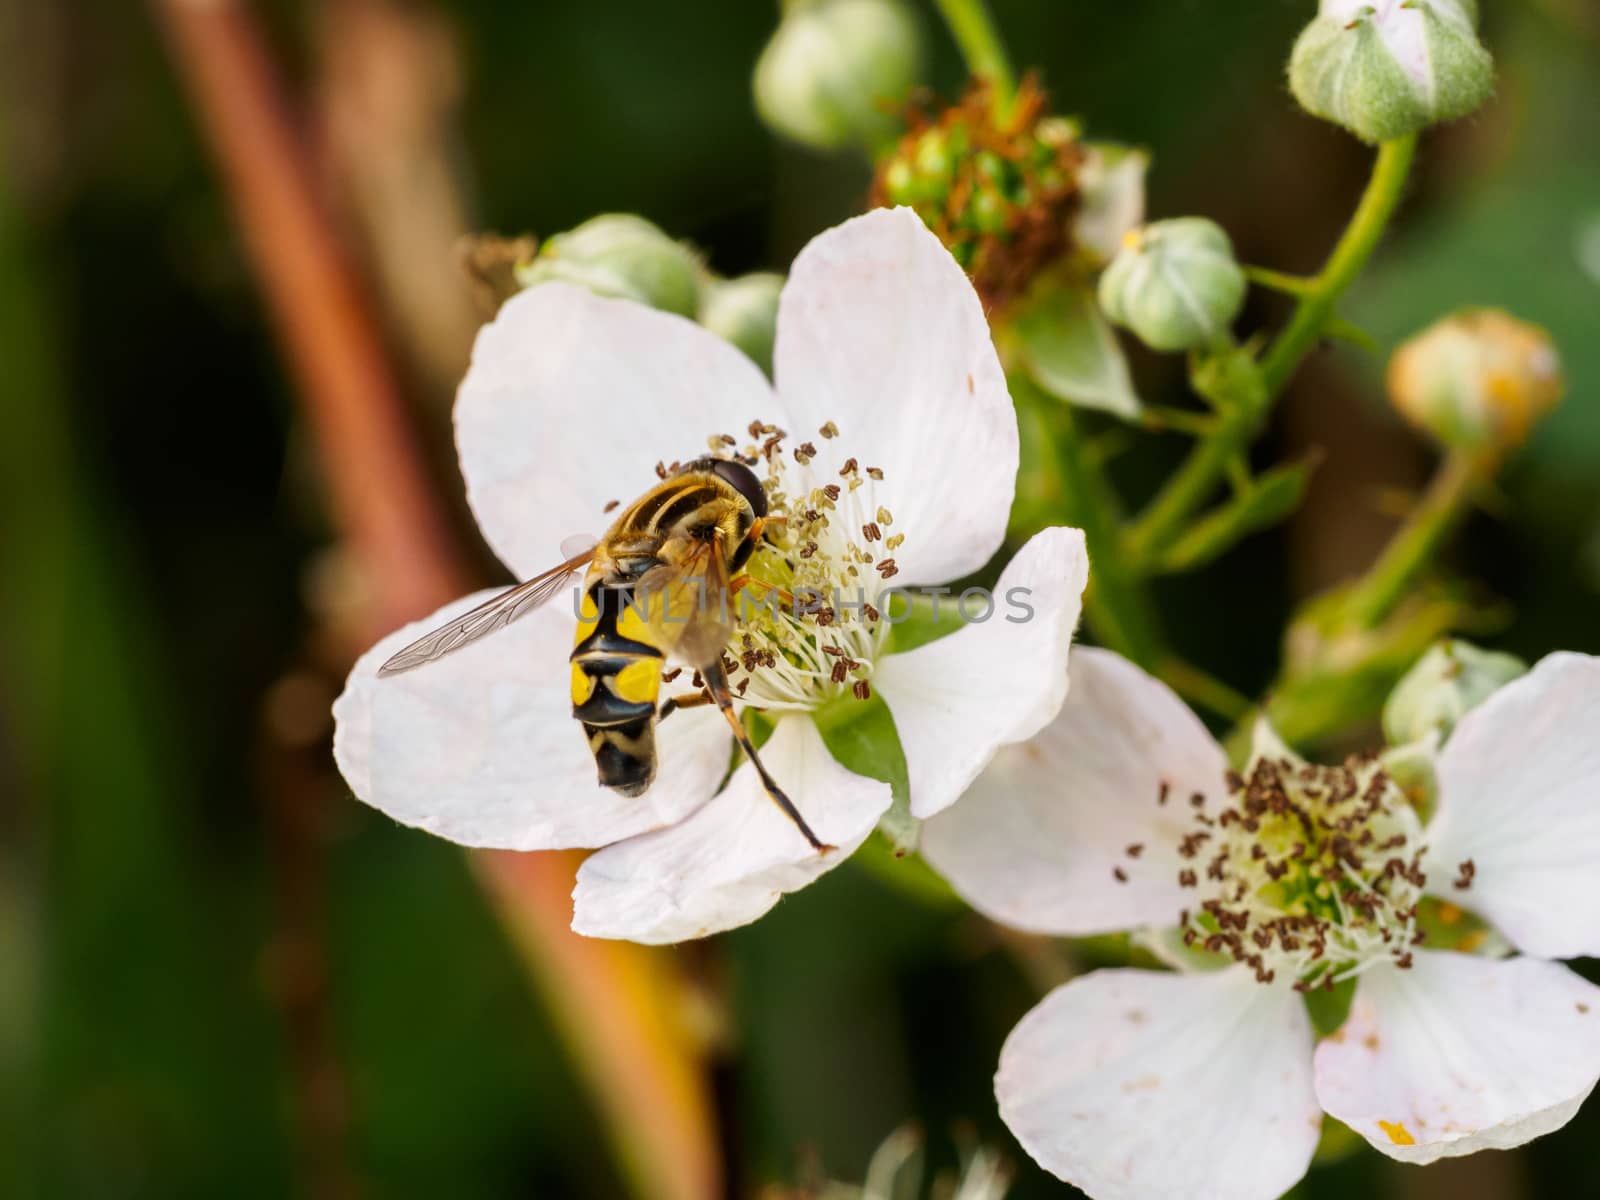 Wasp on white flower by frankhoekzema